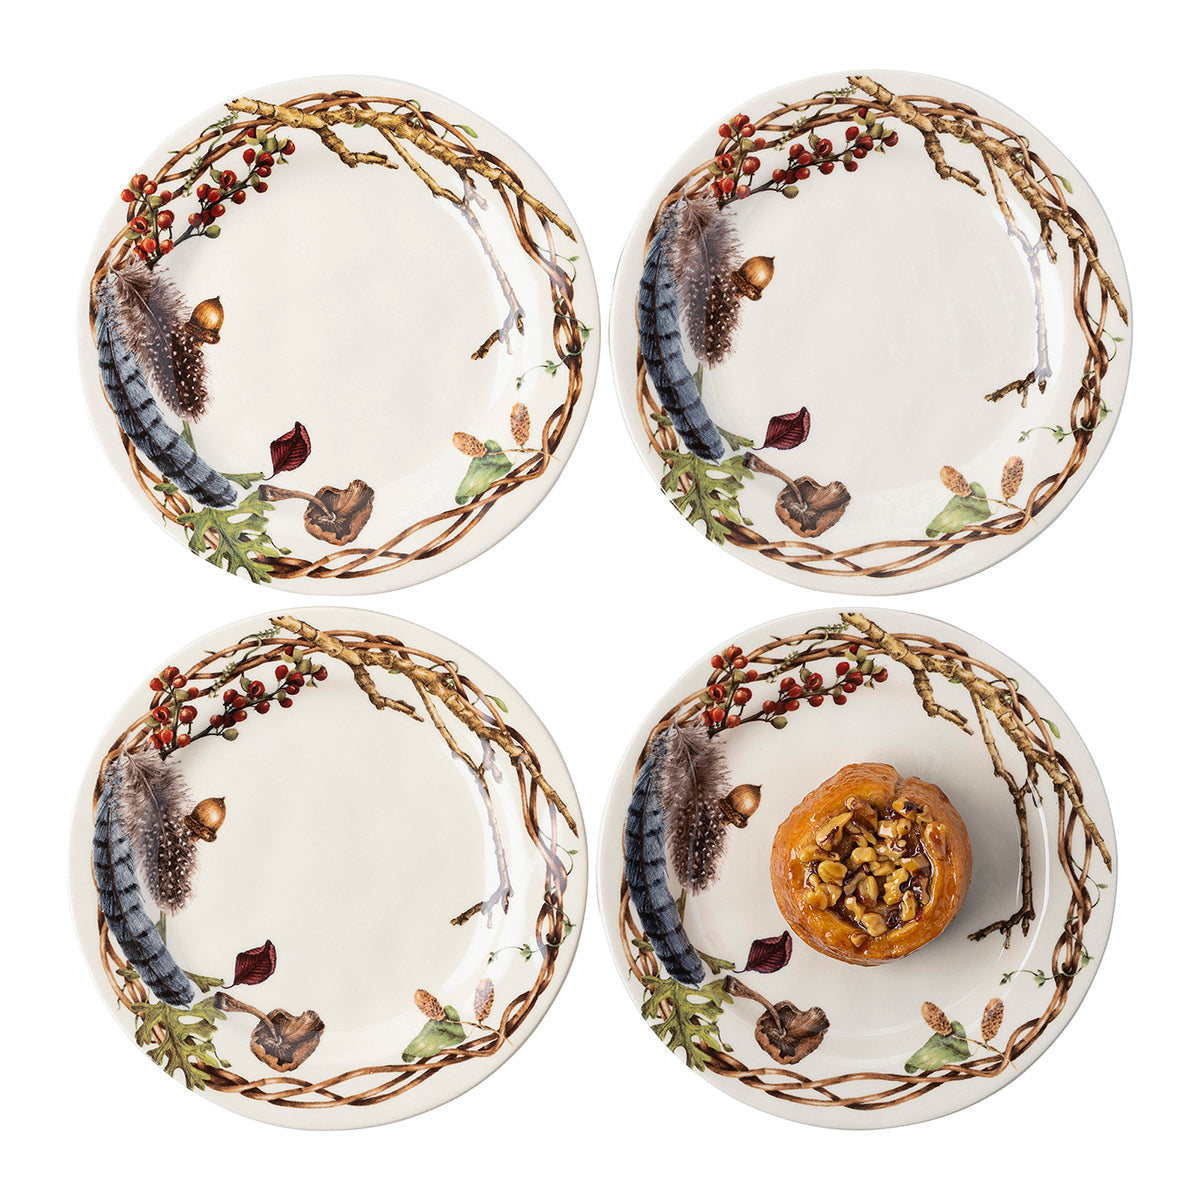 From our Forest Walk Collection- Rustic organic elements like twigs and acorns, festoon the borders of these plates in a rich color palette of gorgeously tangled elegance - creating an irresistible display for nibbles, tidbits, and gourmet pleasures.